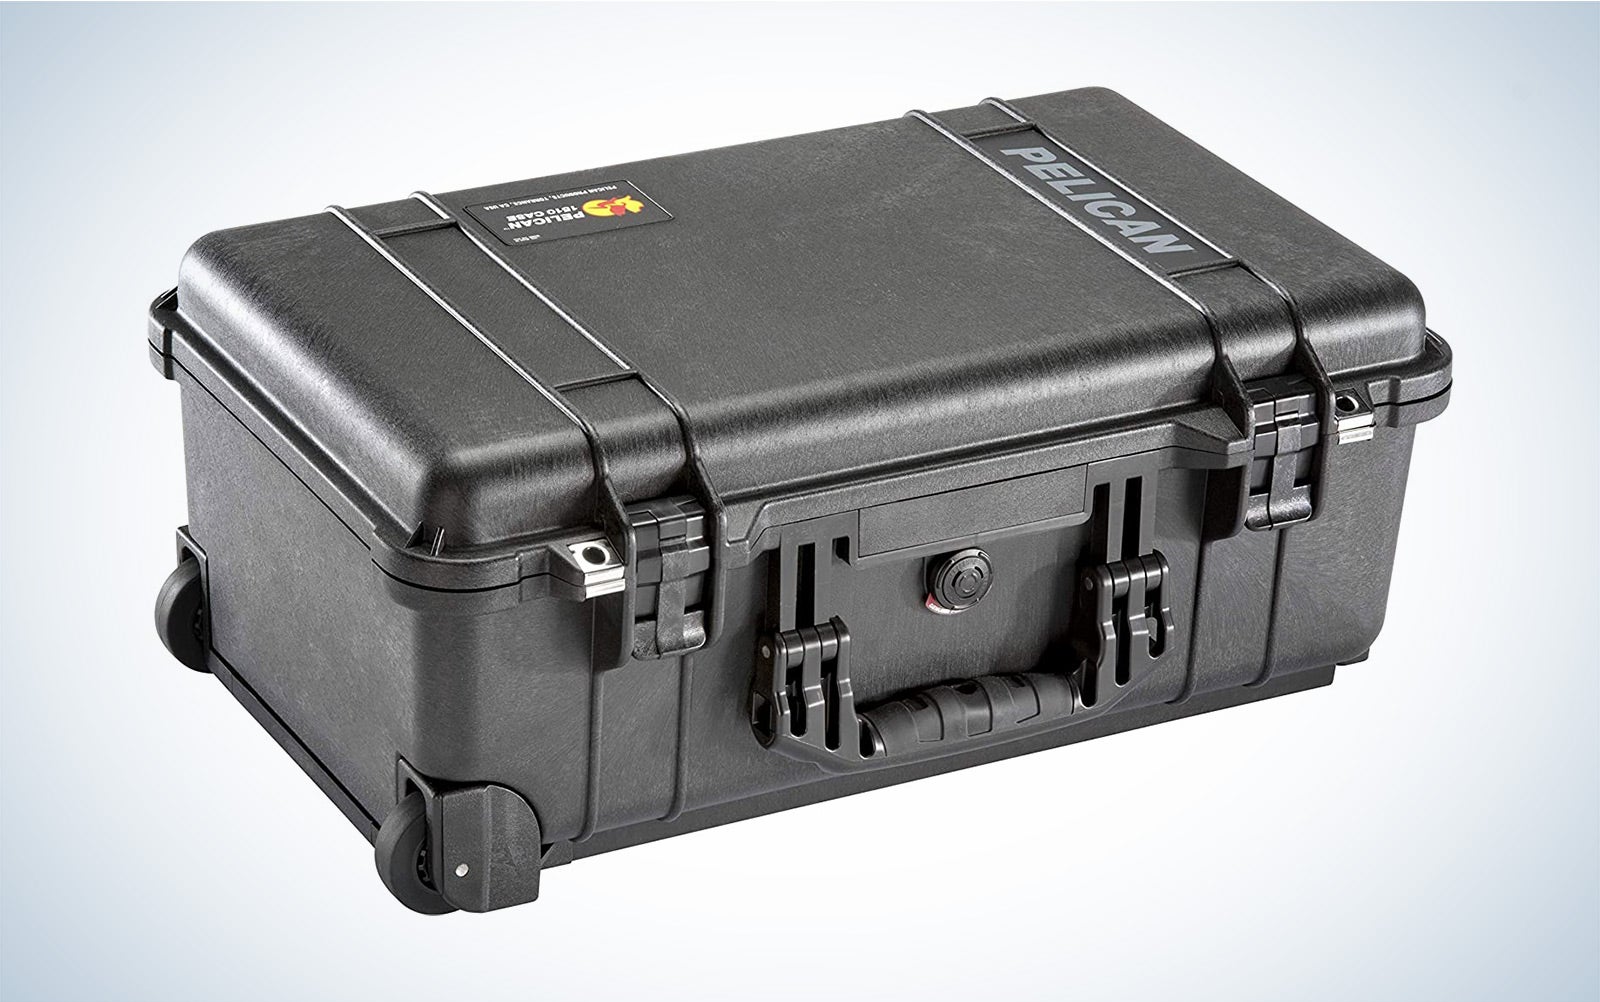 The Pelican 1510 Carry-On Camera Bag is the best waterproof hard case for camera gear.